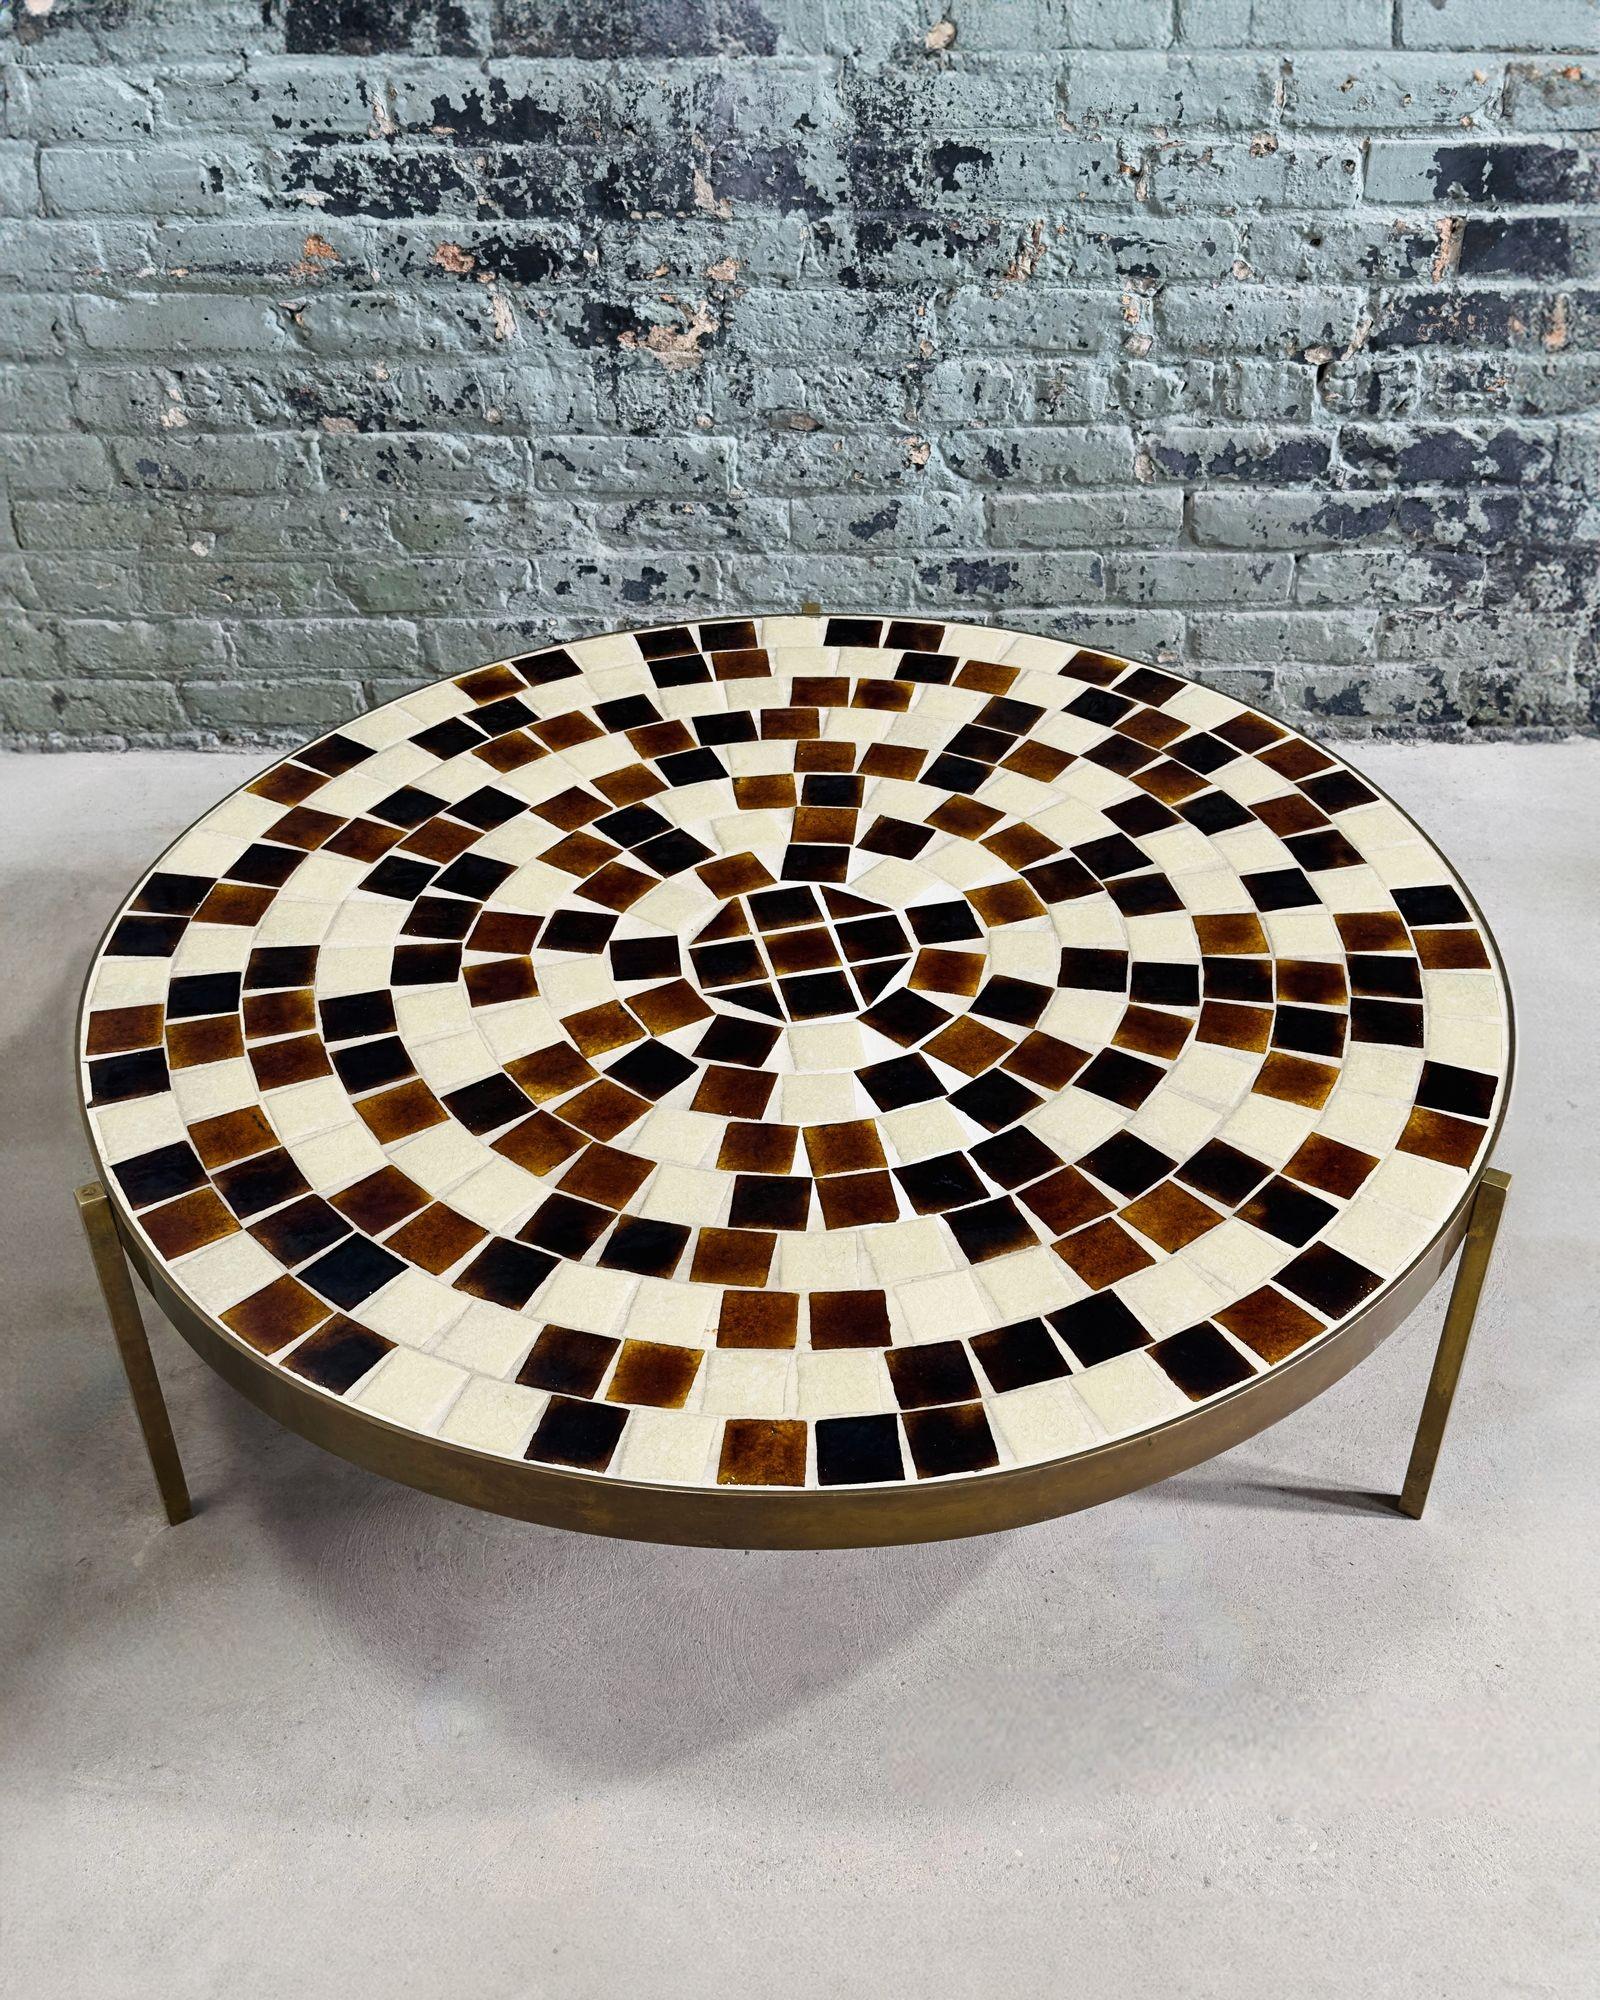 Italian Marble and Brass Coffee Table, 1970. Original with beautiful patina on brass.